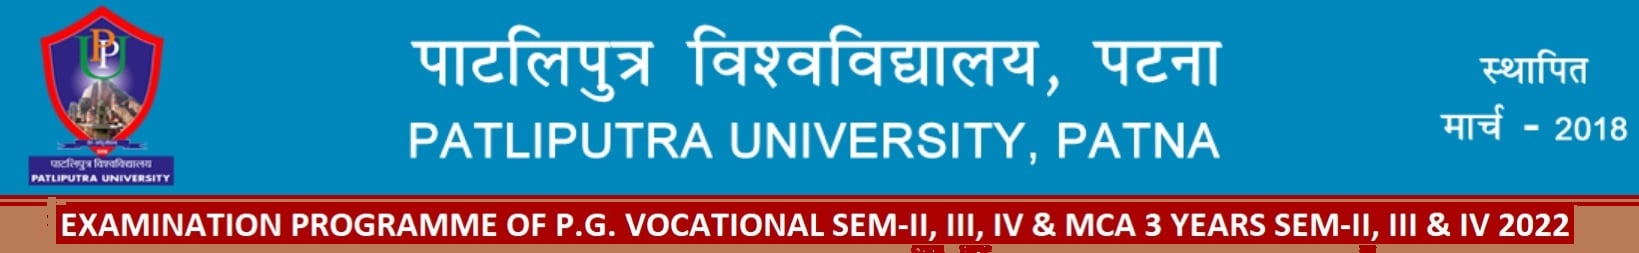 Patliputra University: ONLINE EXAM FORM FILLING DATE OF B.LIS, M.LIS, M.ED & B.P.ED 2022 Announced, Fill your Form Now at ppup.ac.in